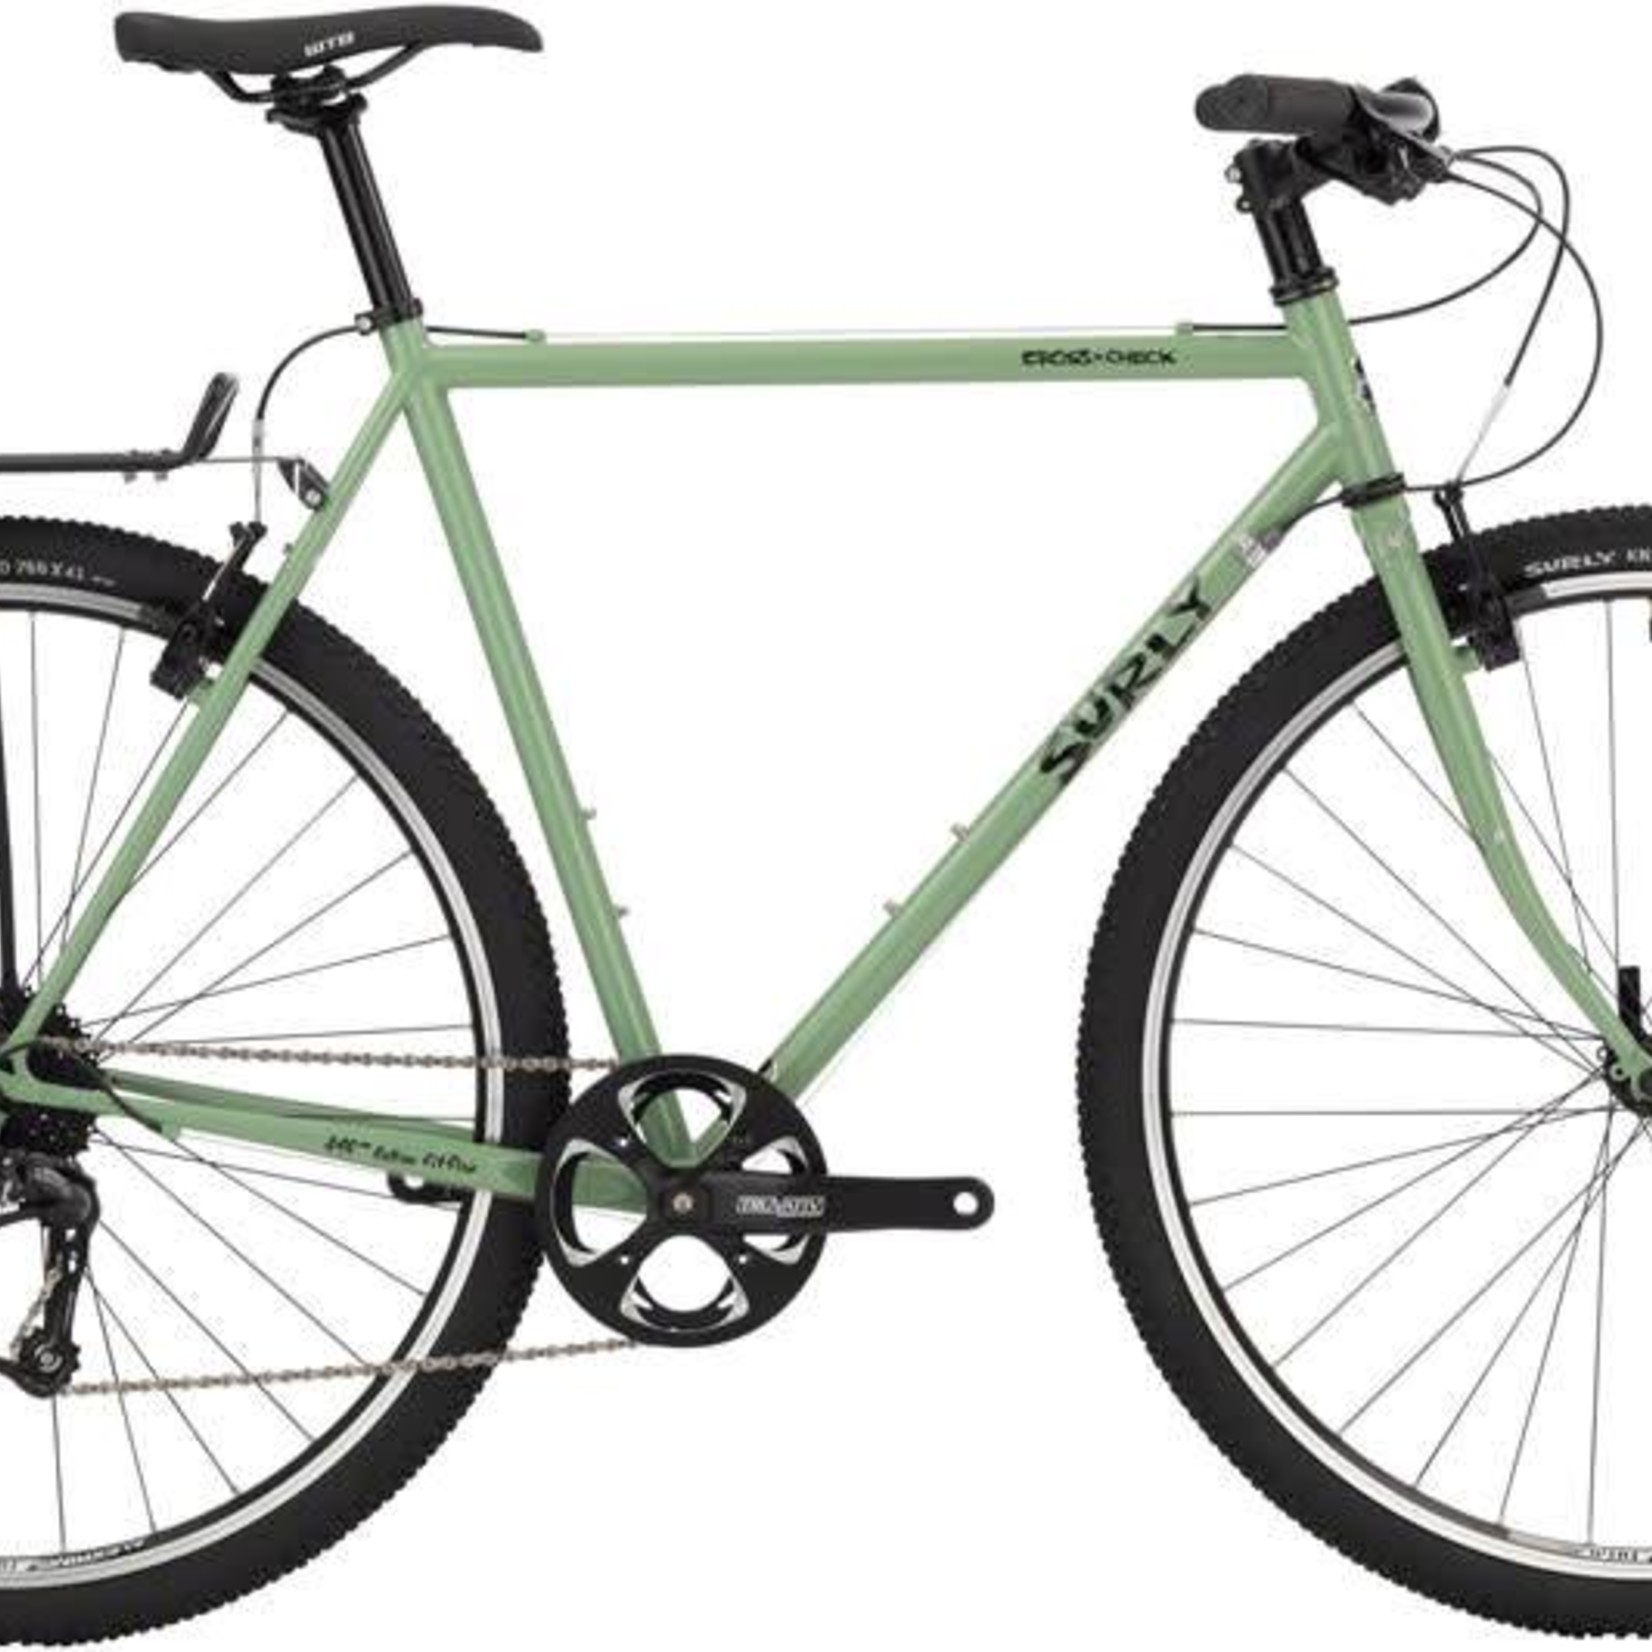 Surly Surly Cross Check Complete Bike Flat Bar 54cm Sage Green